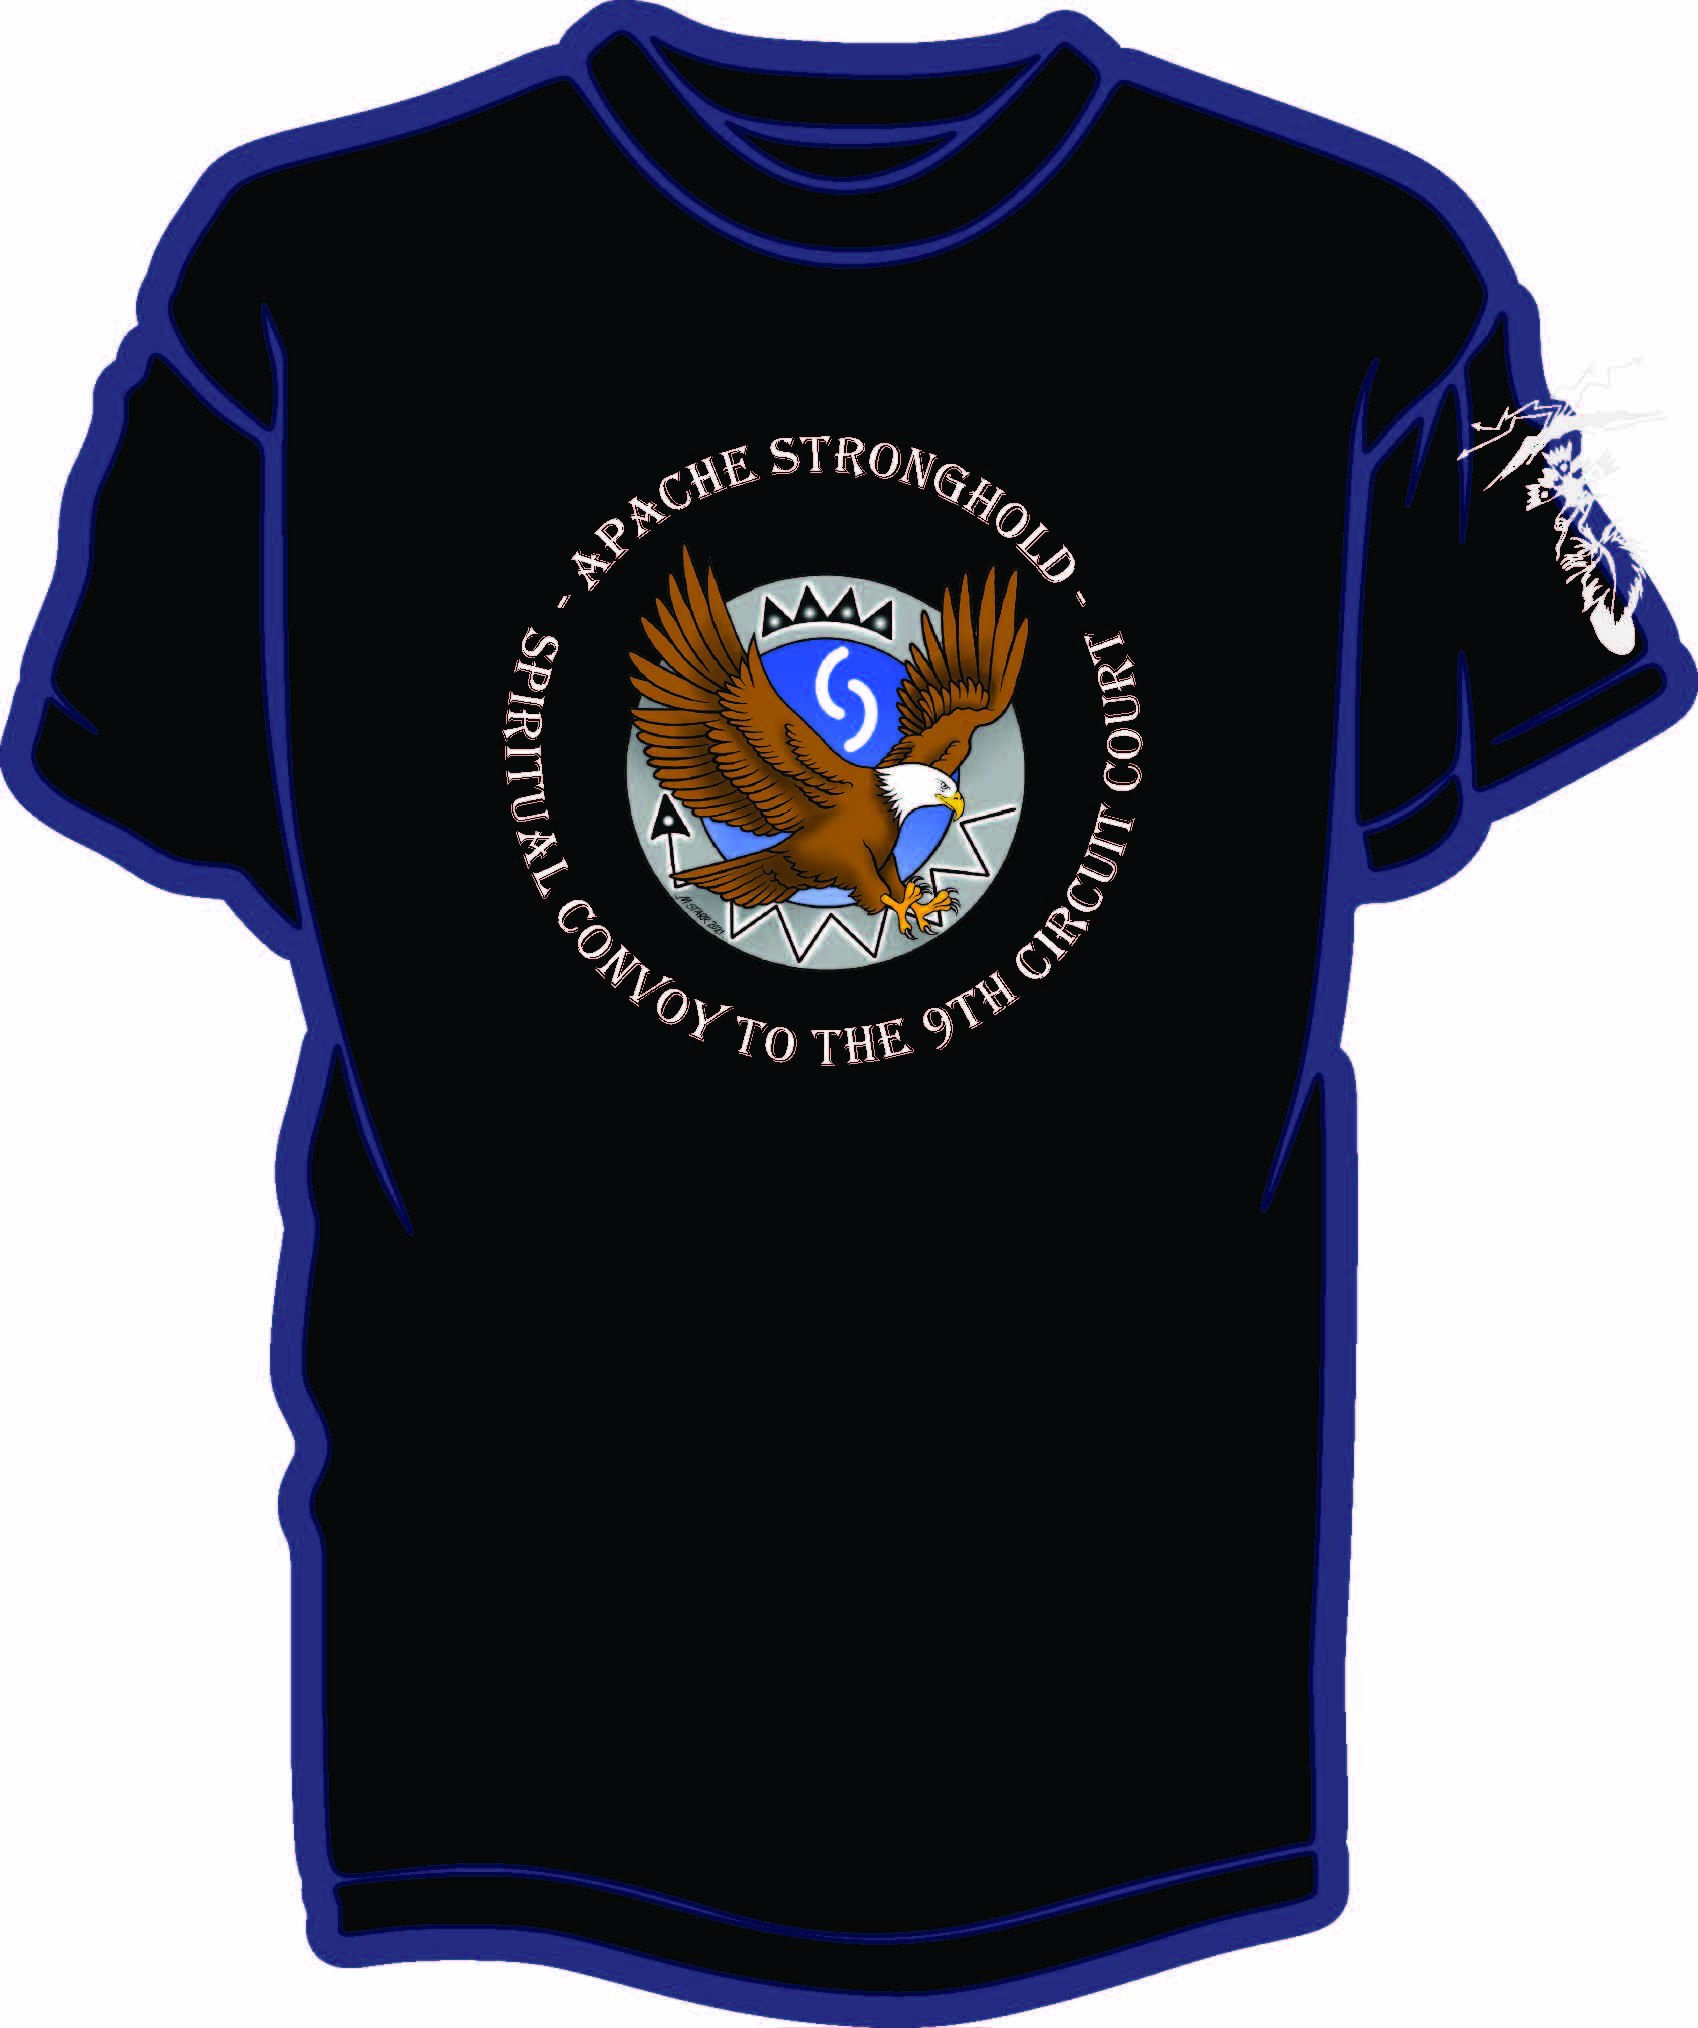 Black shirts with colored image for Apache Convoy